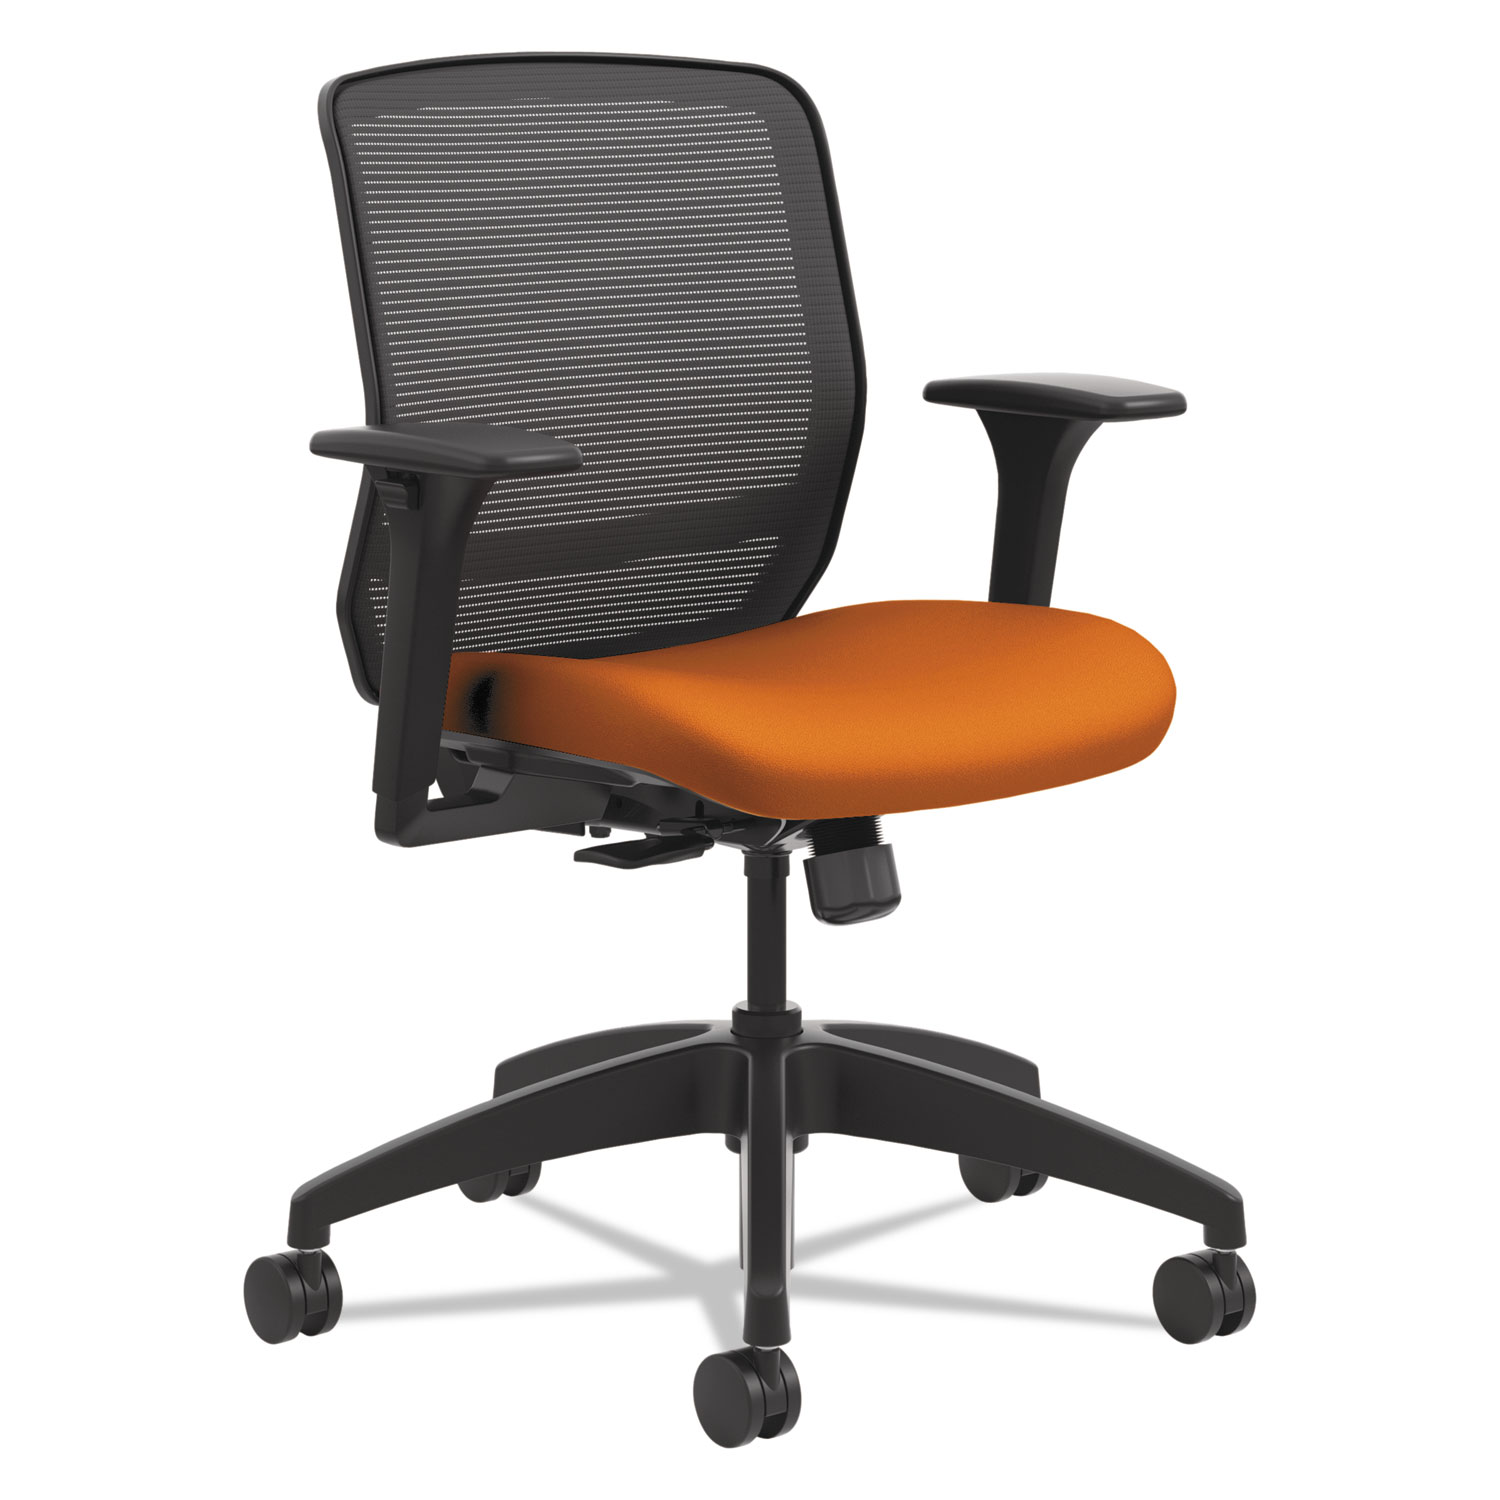  HON HQTMM.Y0.A.H.IM.CU47.SB Quotient Series Mesh Mid-Back Task Chair, Supports up to 300 lbs., Apricot Seat/Black Back, Black Base (HONQTMMY1ACU47) 